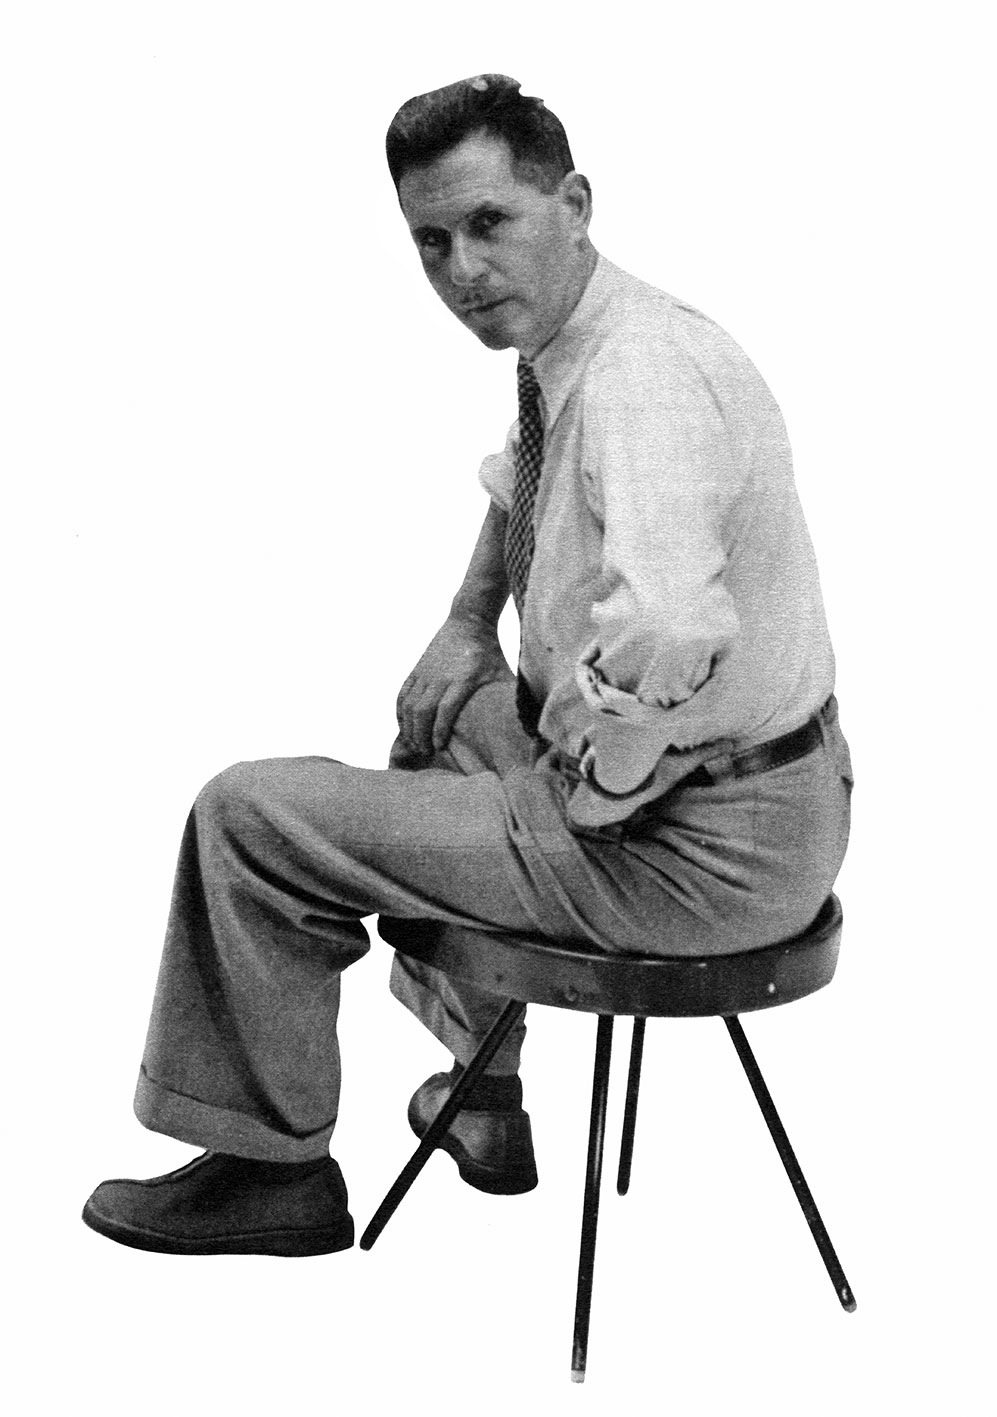 Jean Prouvé seated on a stool no. 307, ca. 1952.